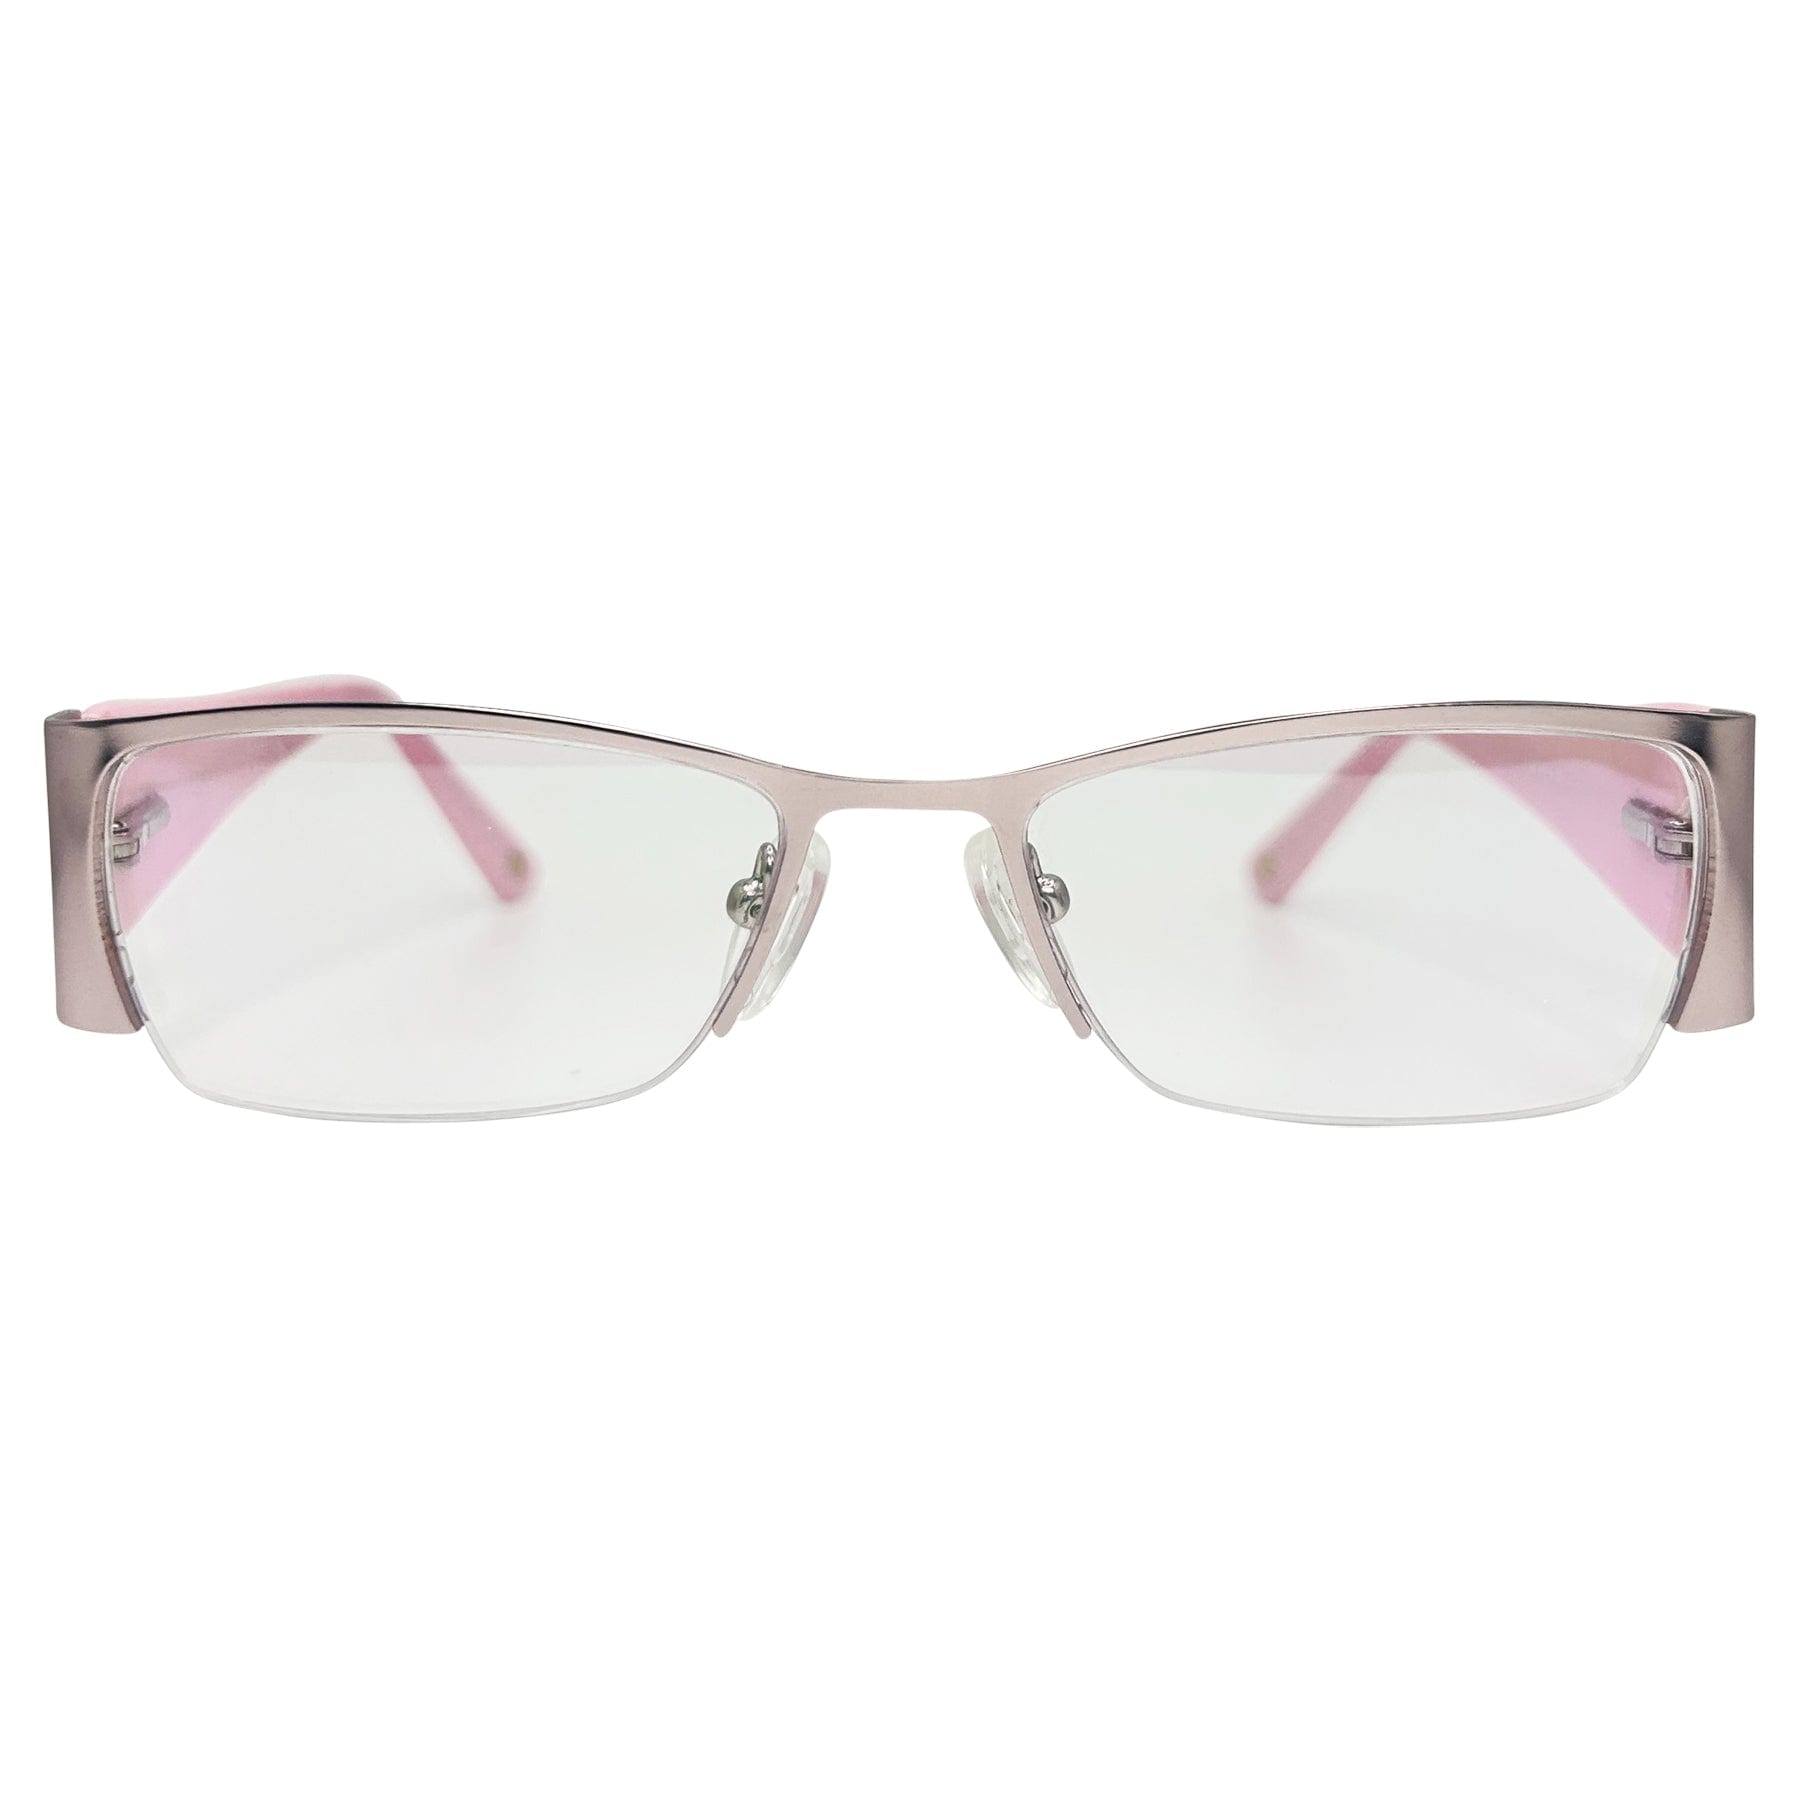 pink metal colored glasses with an iridescent lens and 90s bayonetta-style frame